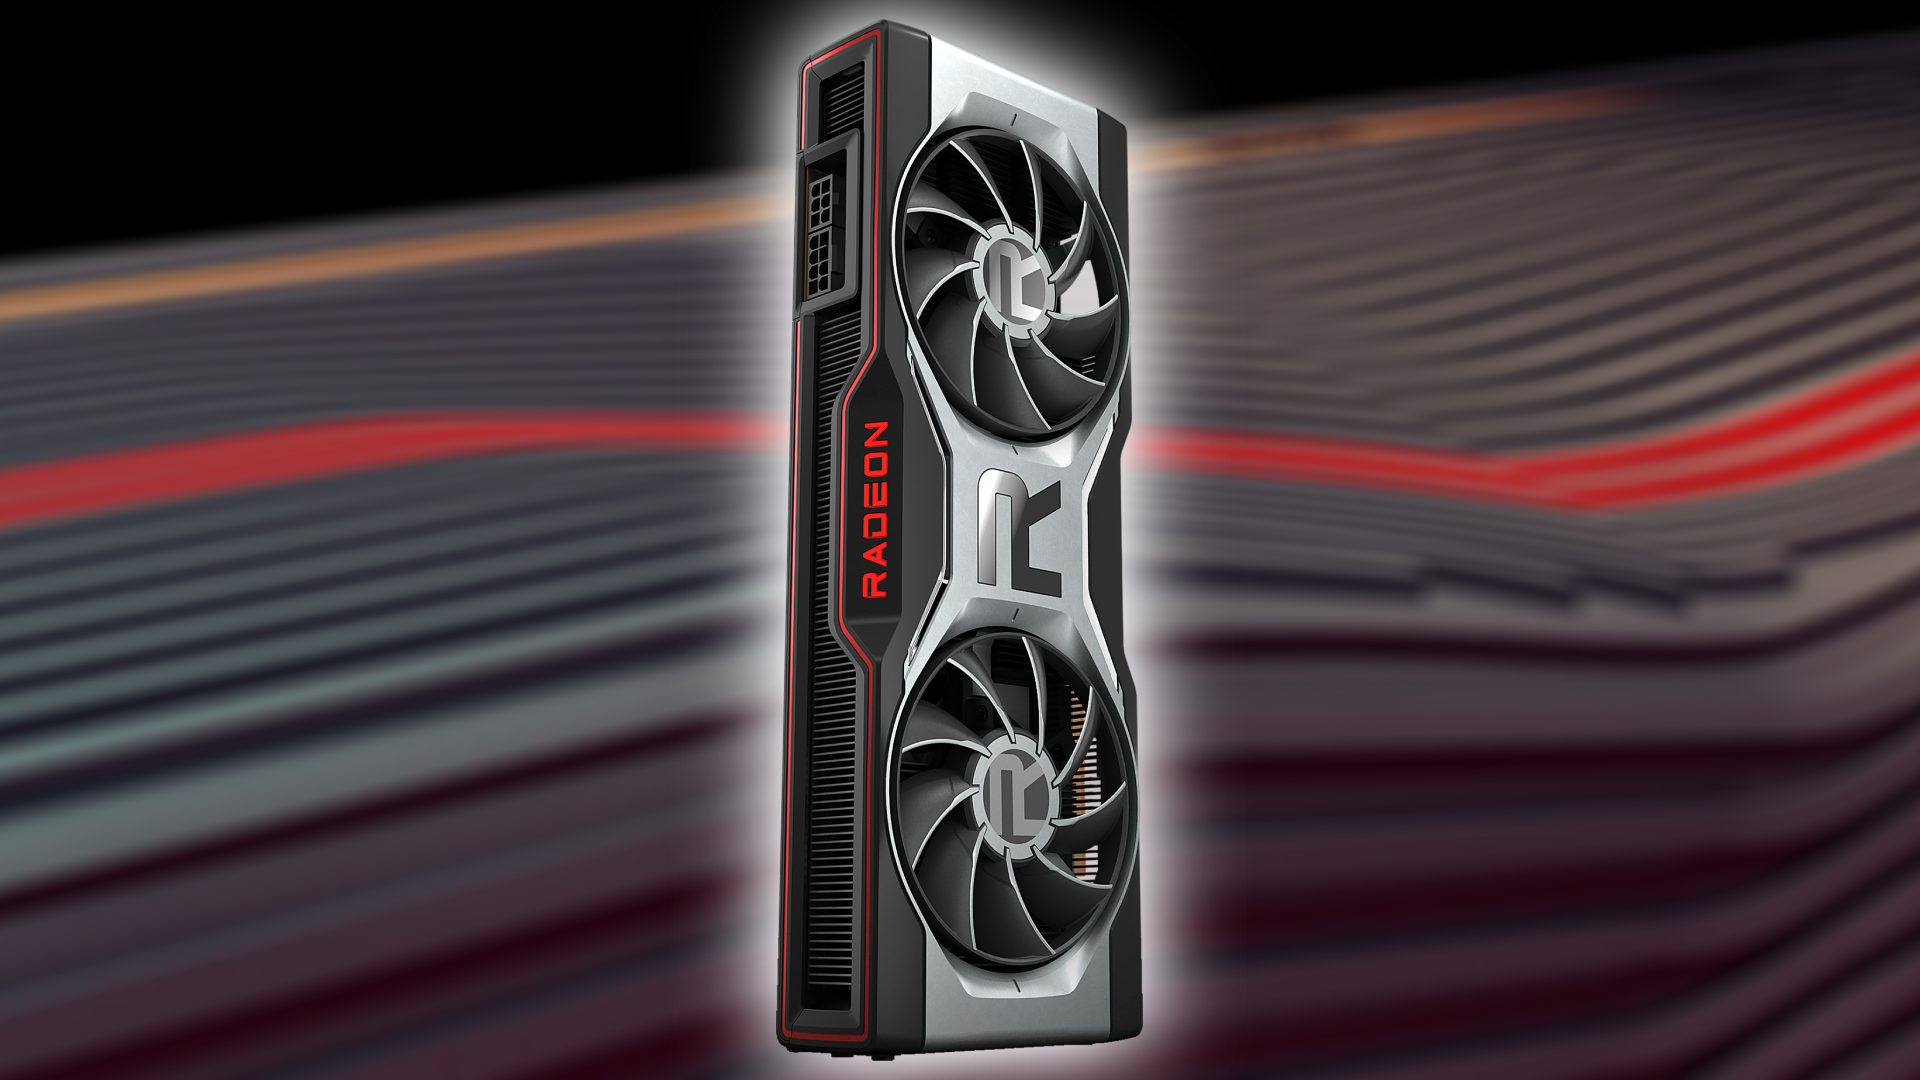 AMD Radeon RX 7900: A Radeon graphics card with blurred AMD backdrop